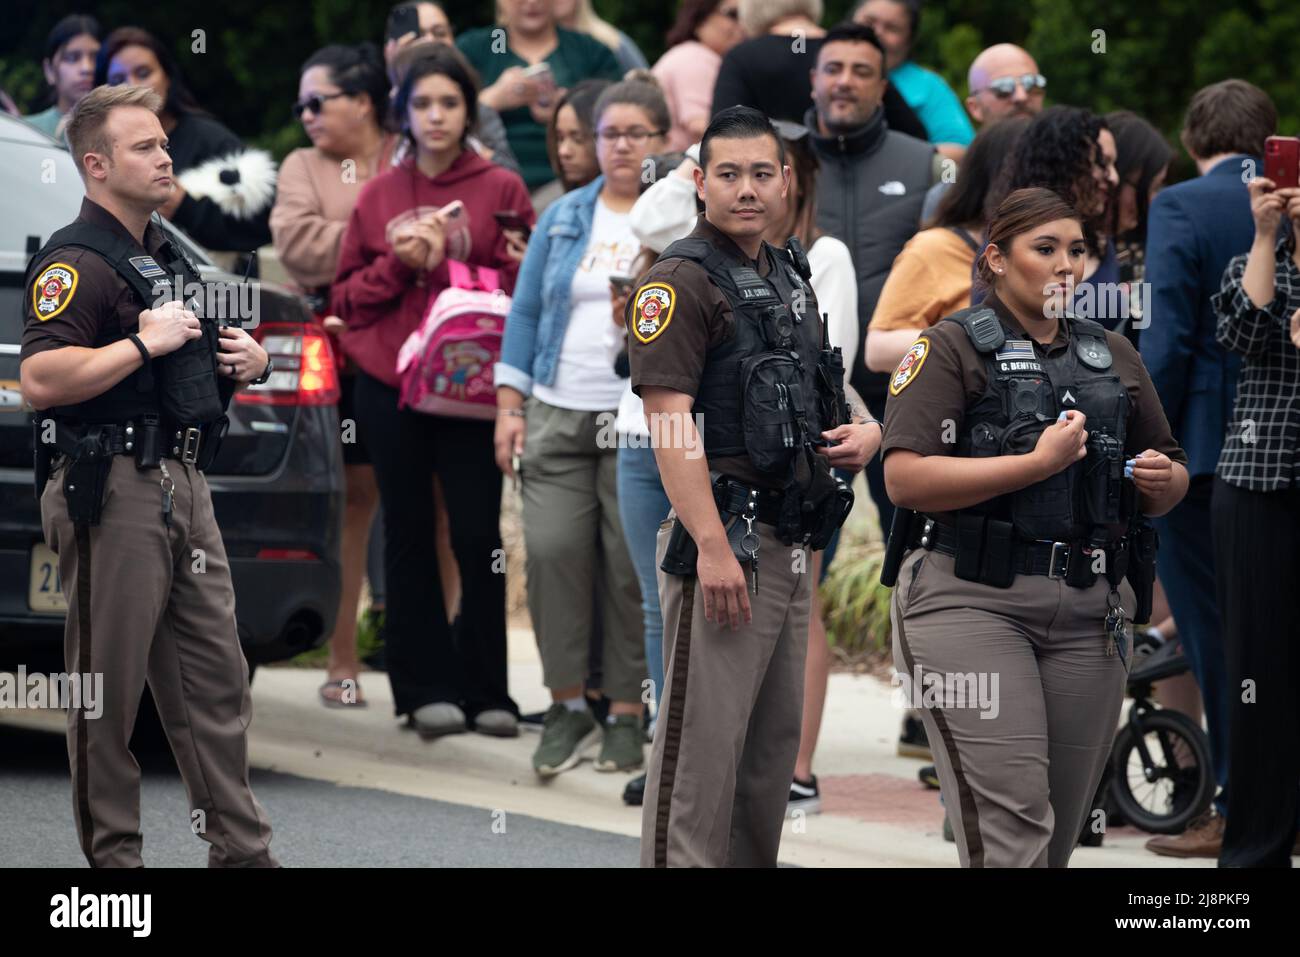 Fairfax County Sheriff's Deputies provide crowd control for Johnny Depp and Amber Heards departure from the Fairfax County Courthouse, in Fairfax, at the close of another day in his civil trial with Amber Heard, Thursday, May 5, 2022. Depp brought a defamation lawsuit against his former wife, actress Amber Heard, after she wrote an op-ed in The Washington Post in 2018 that, without naming Depp, accused him of domestic abuse.Credit: Cliff Owen/CNP/Sipa USA (RESTRICTION: NO New York or New Jersey Newspapers or newspapers within a 75 mile radius of New York City) Stock Photo